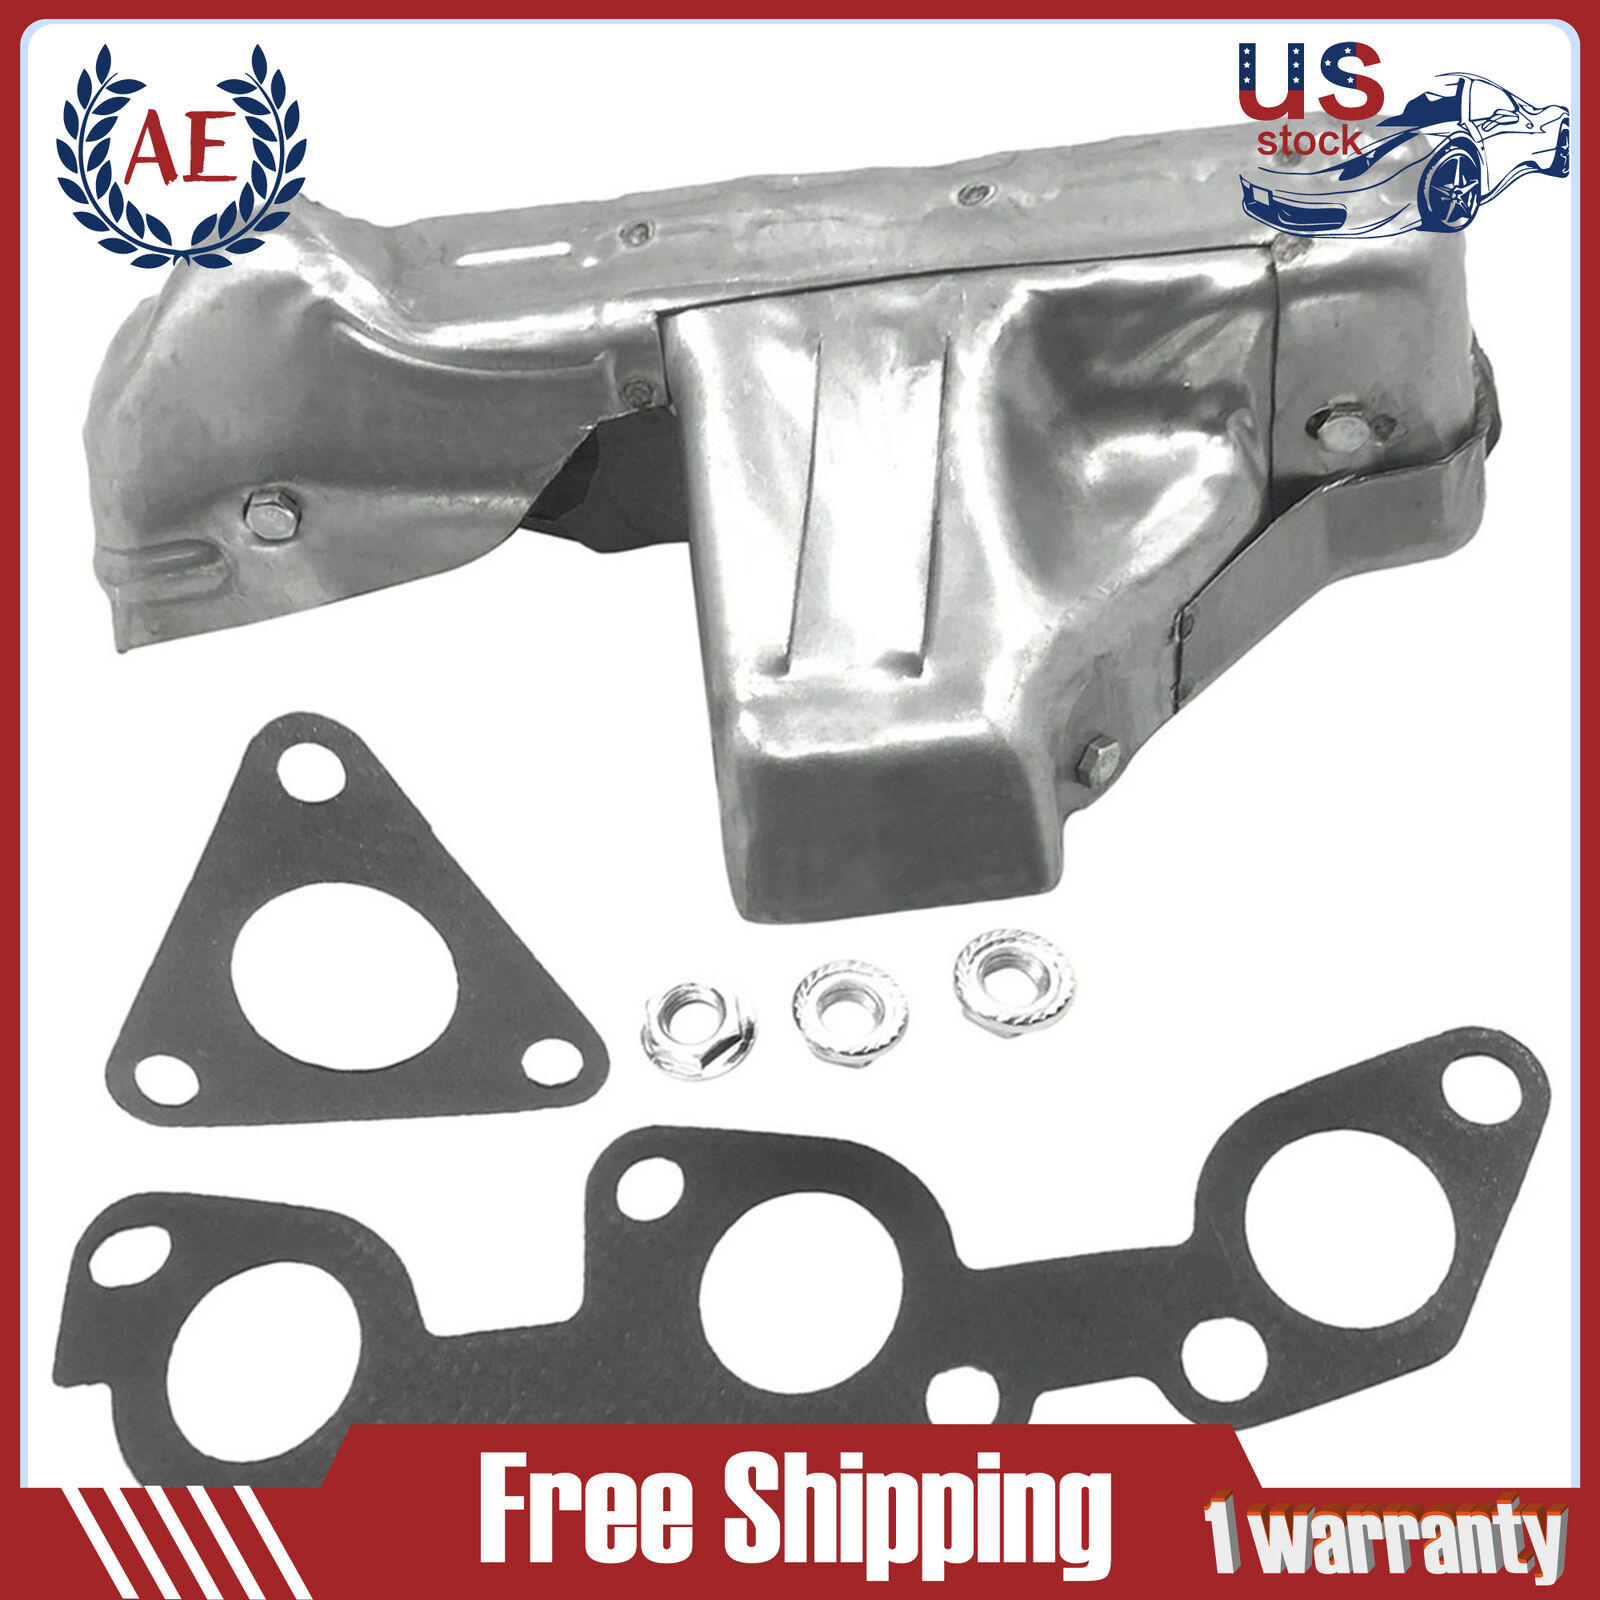 Exhaust Manifold & Gasket Passenger Side Right For Nissan Xterra Frontier 3.3L